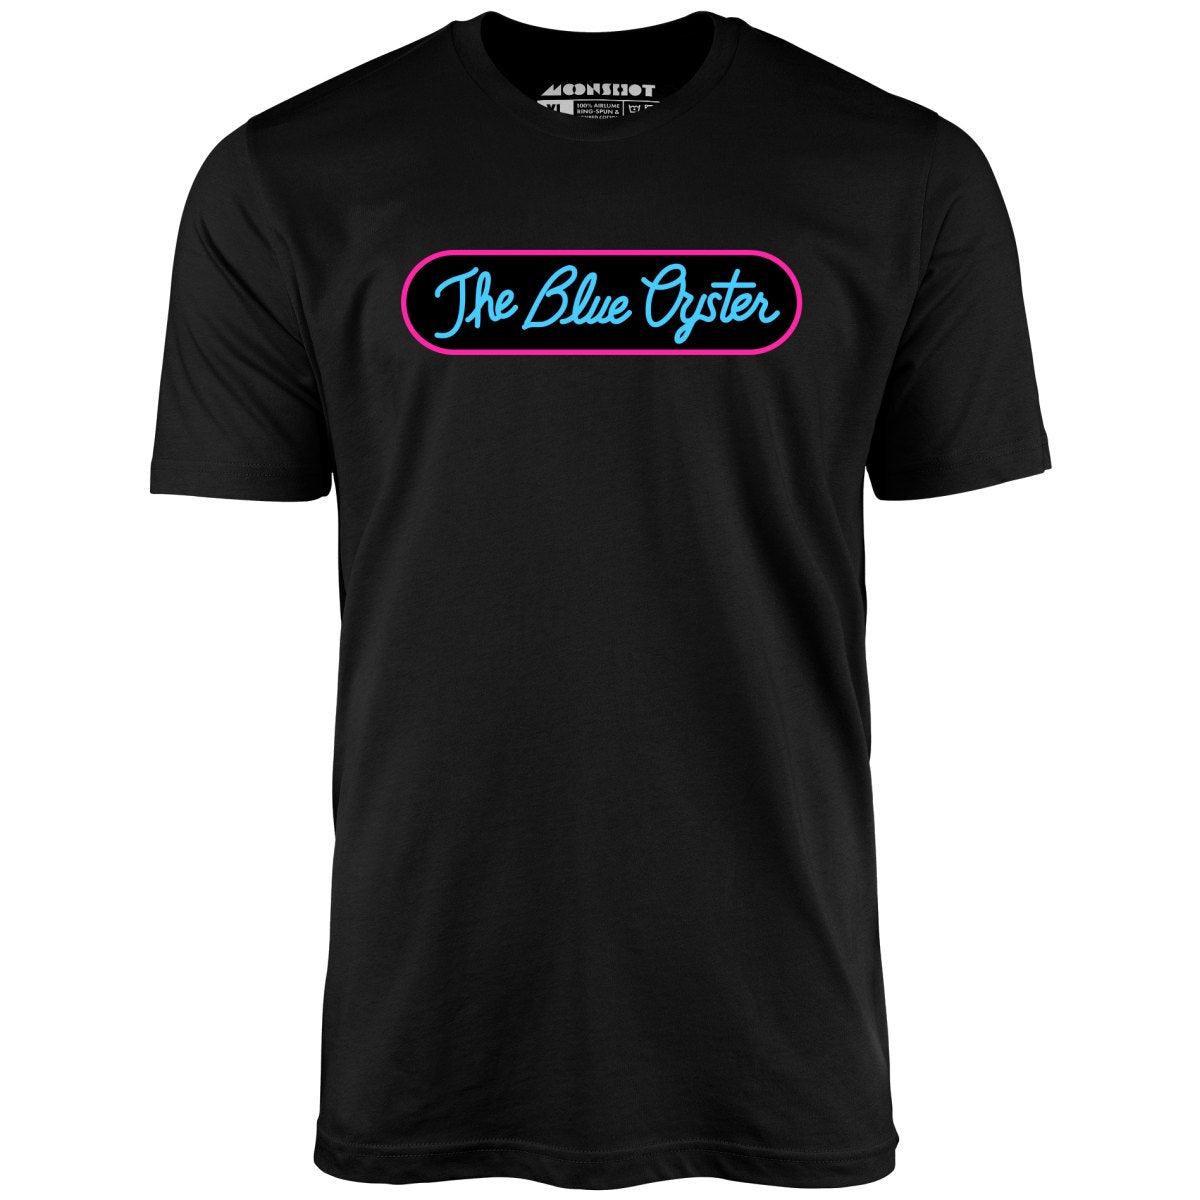 The Blue Oyster - Unisex T-Shirt